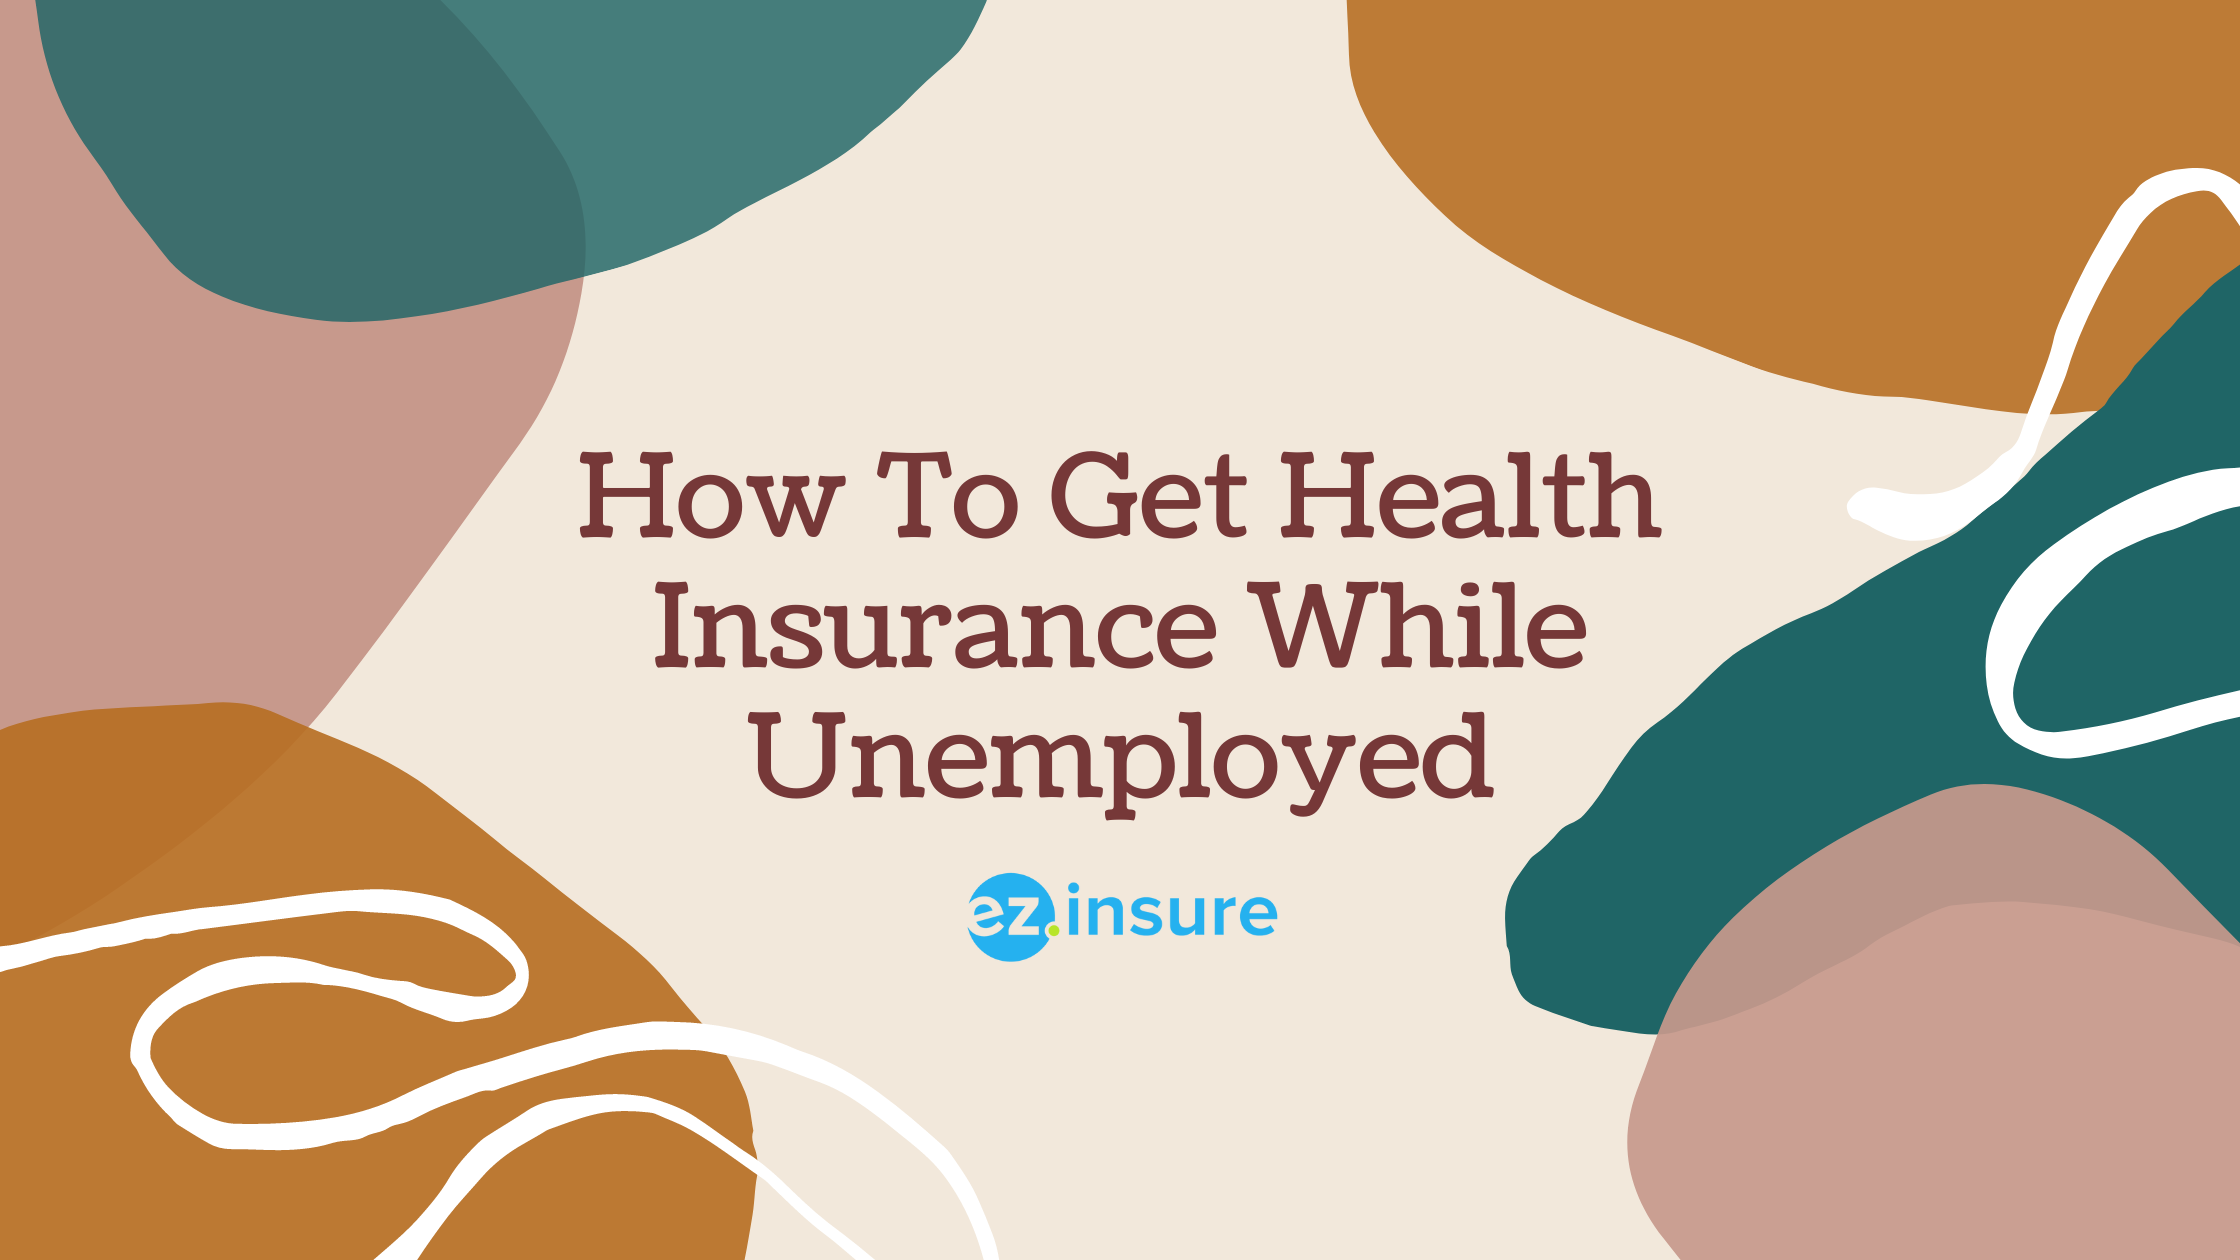 How To Get Health Insurance While Unemployed text overlaying image